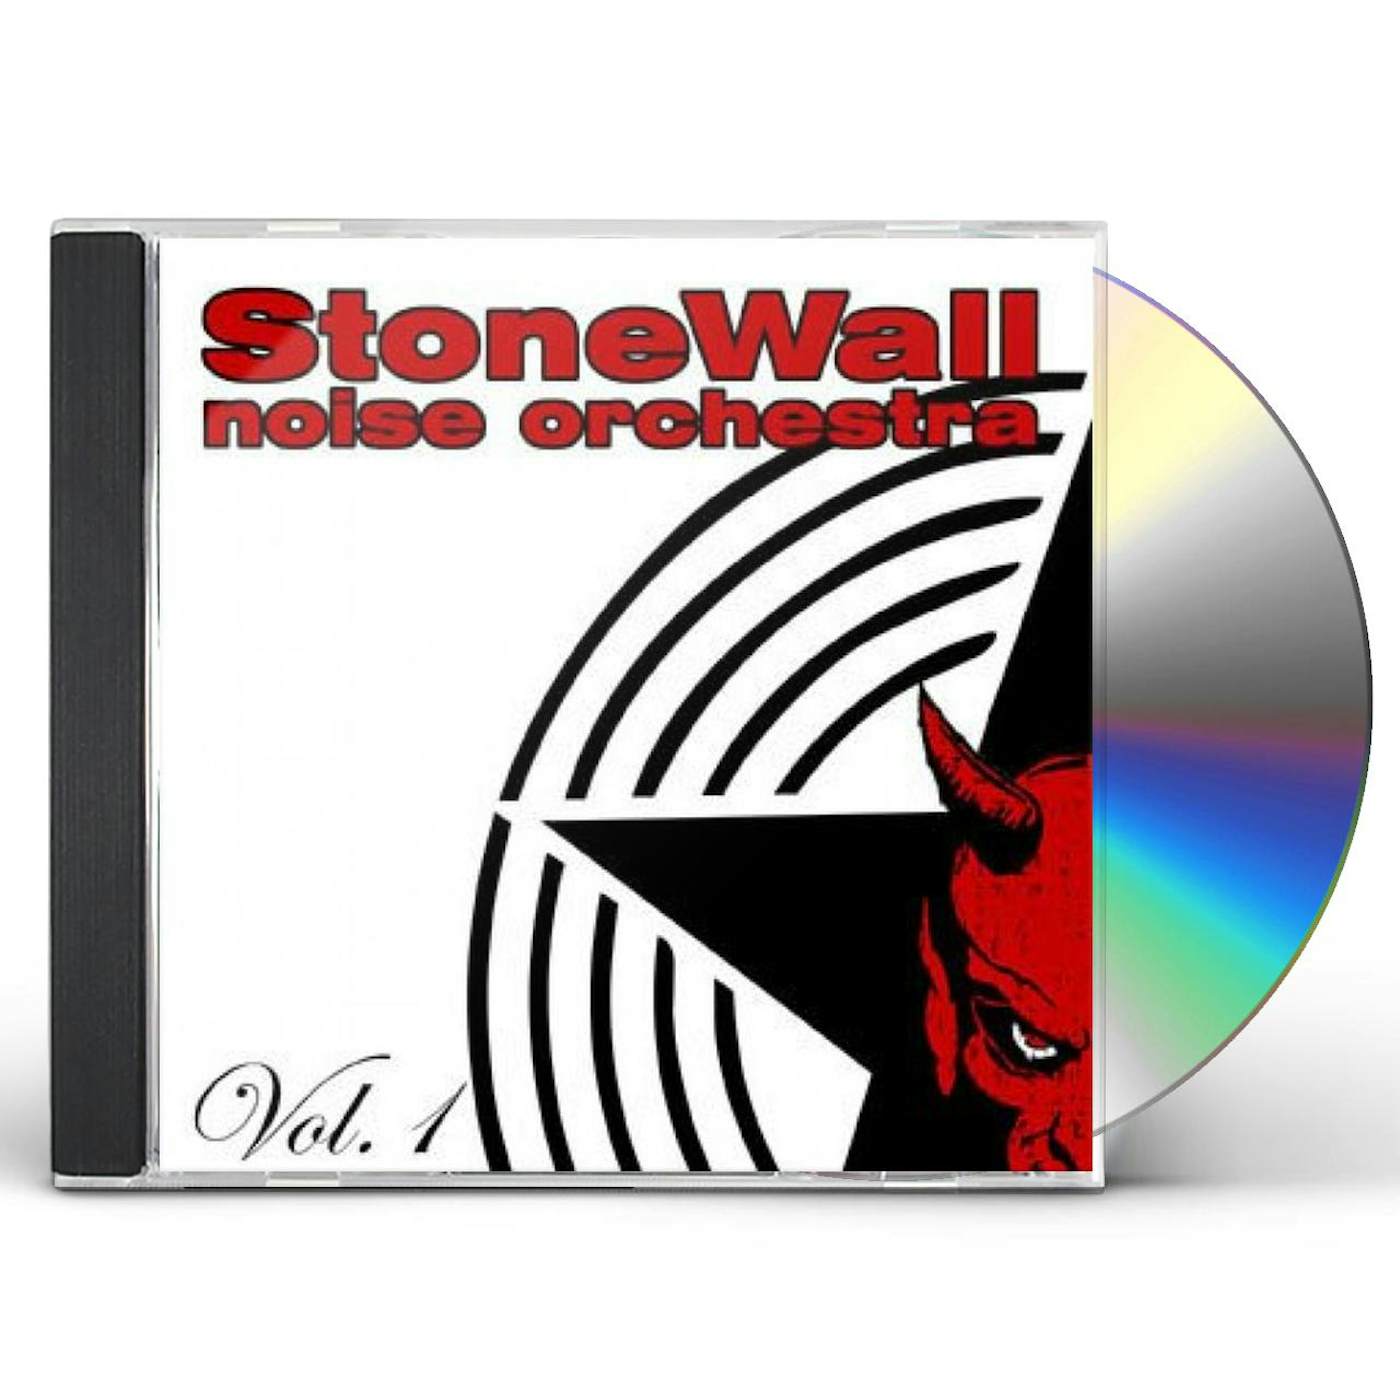 Stonewall Noise Orchestra VOL. 1 CD